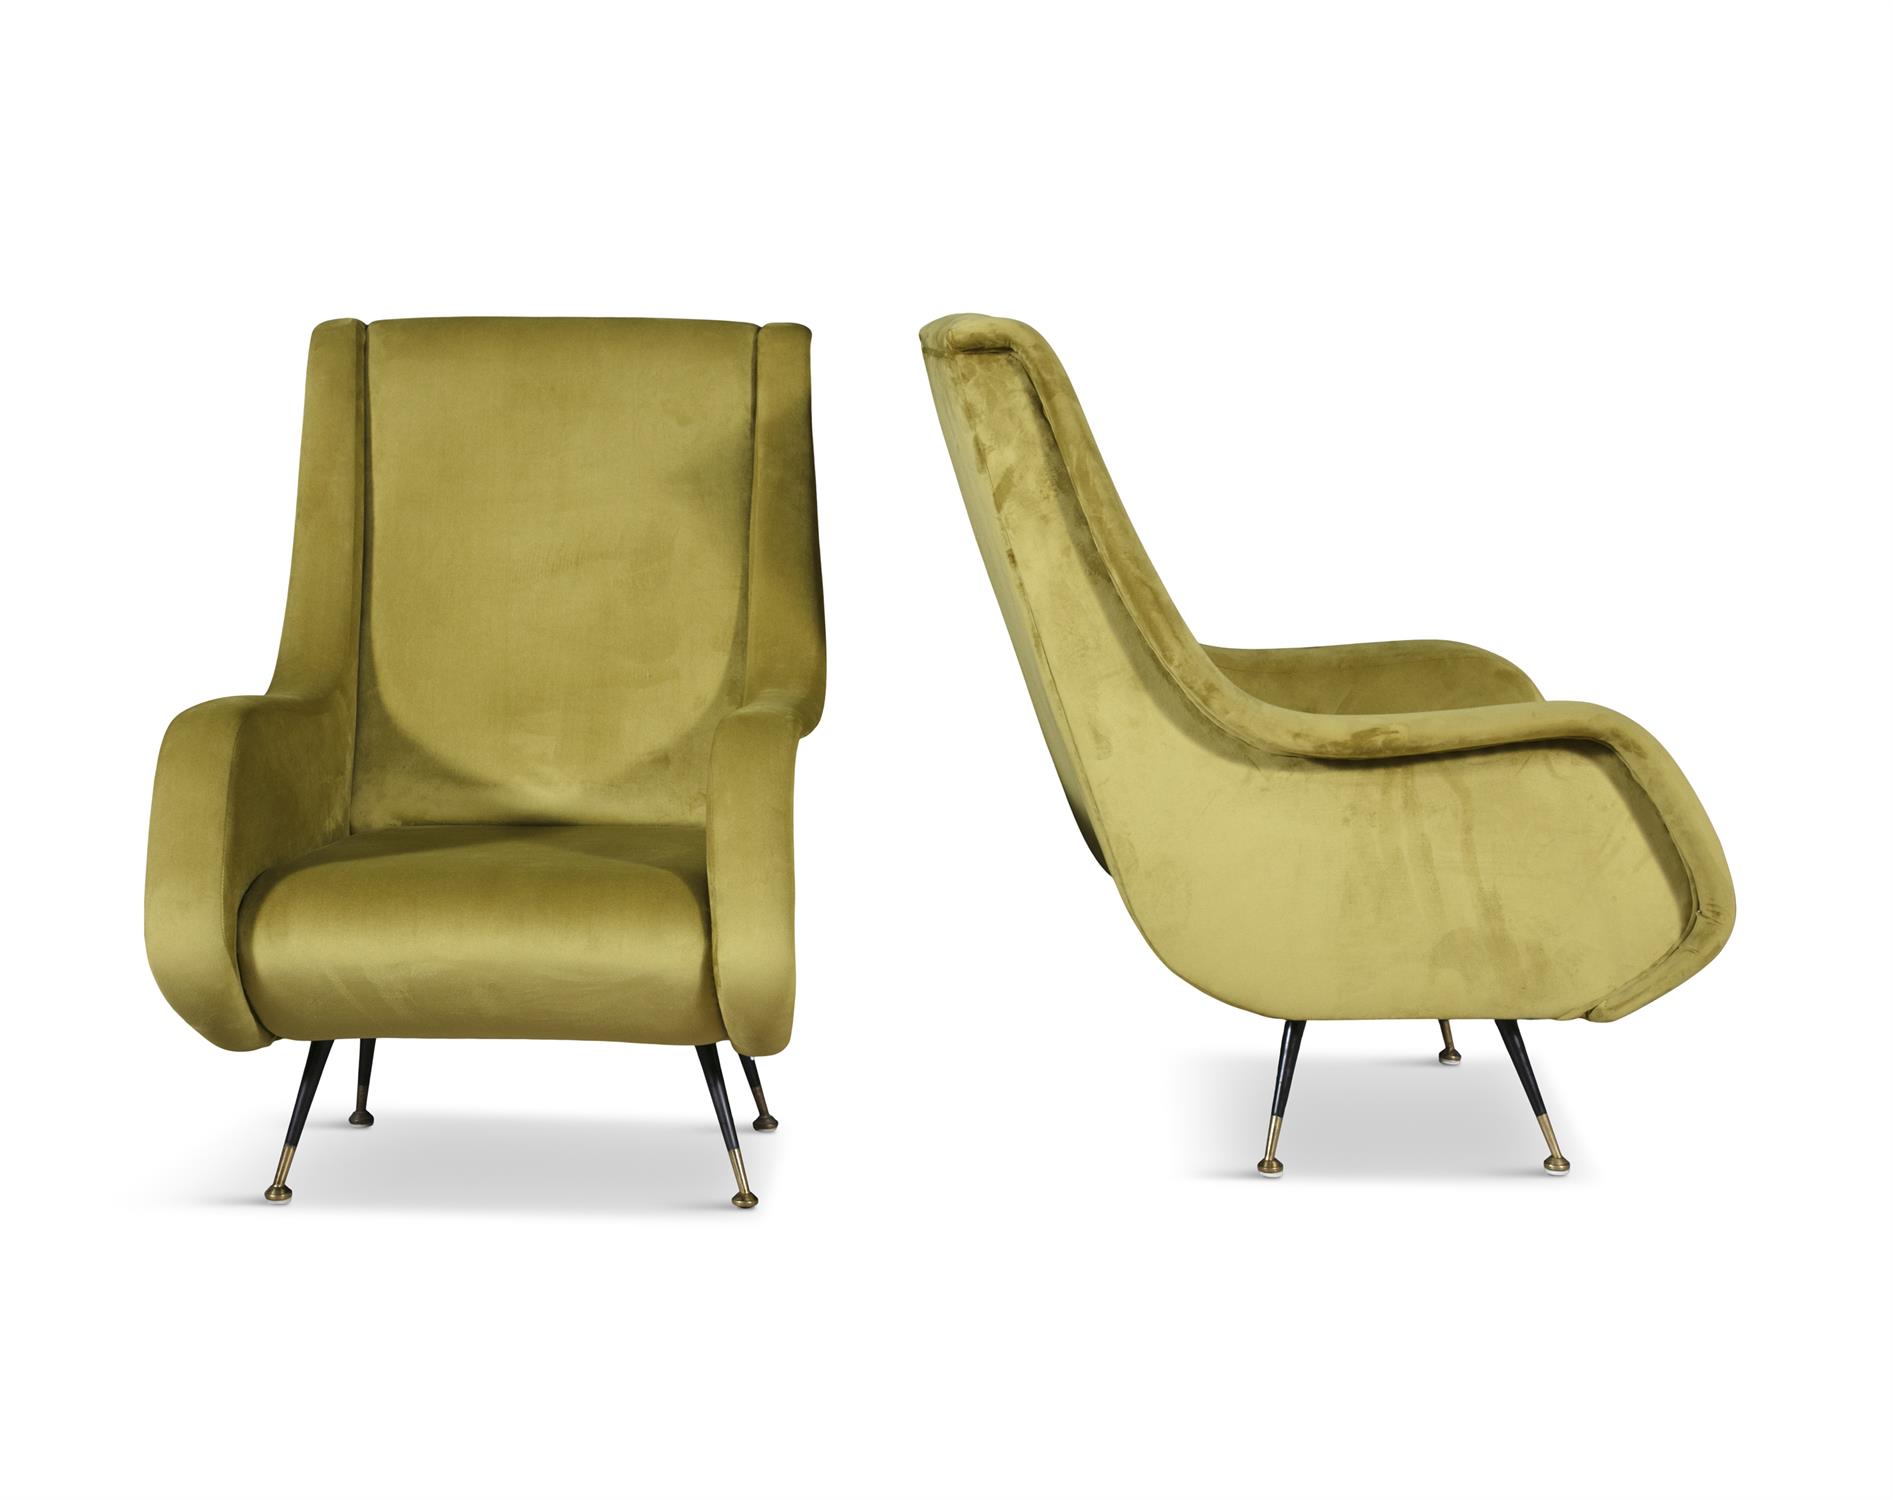 ARMCHAIRS A pair olive upholstered Italian armchairs. 67 x 90 x 97cm(h); seat 40cm(h) - Image 3 of 5